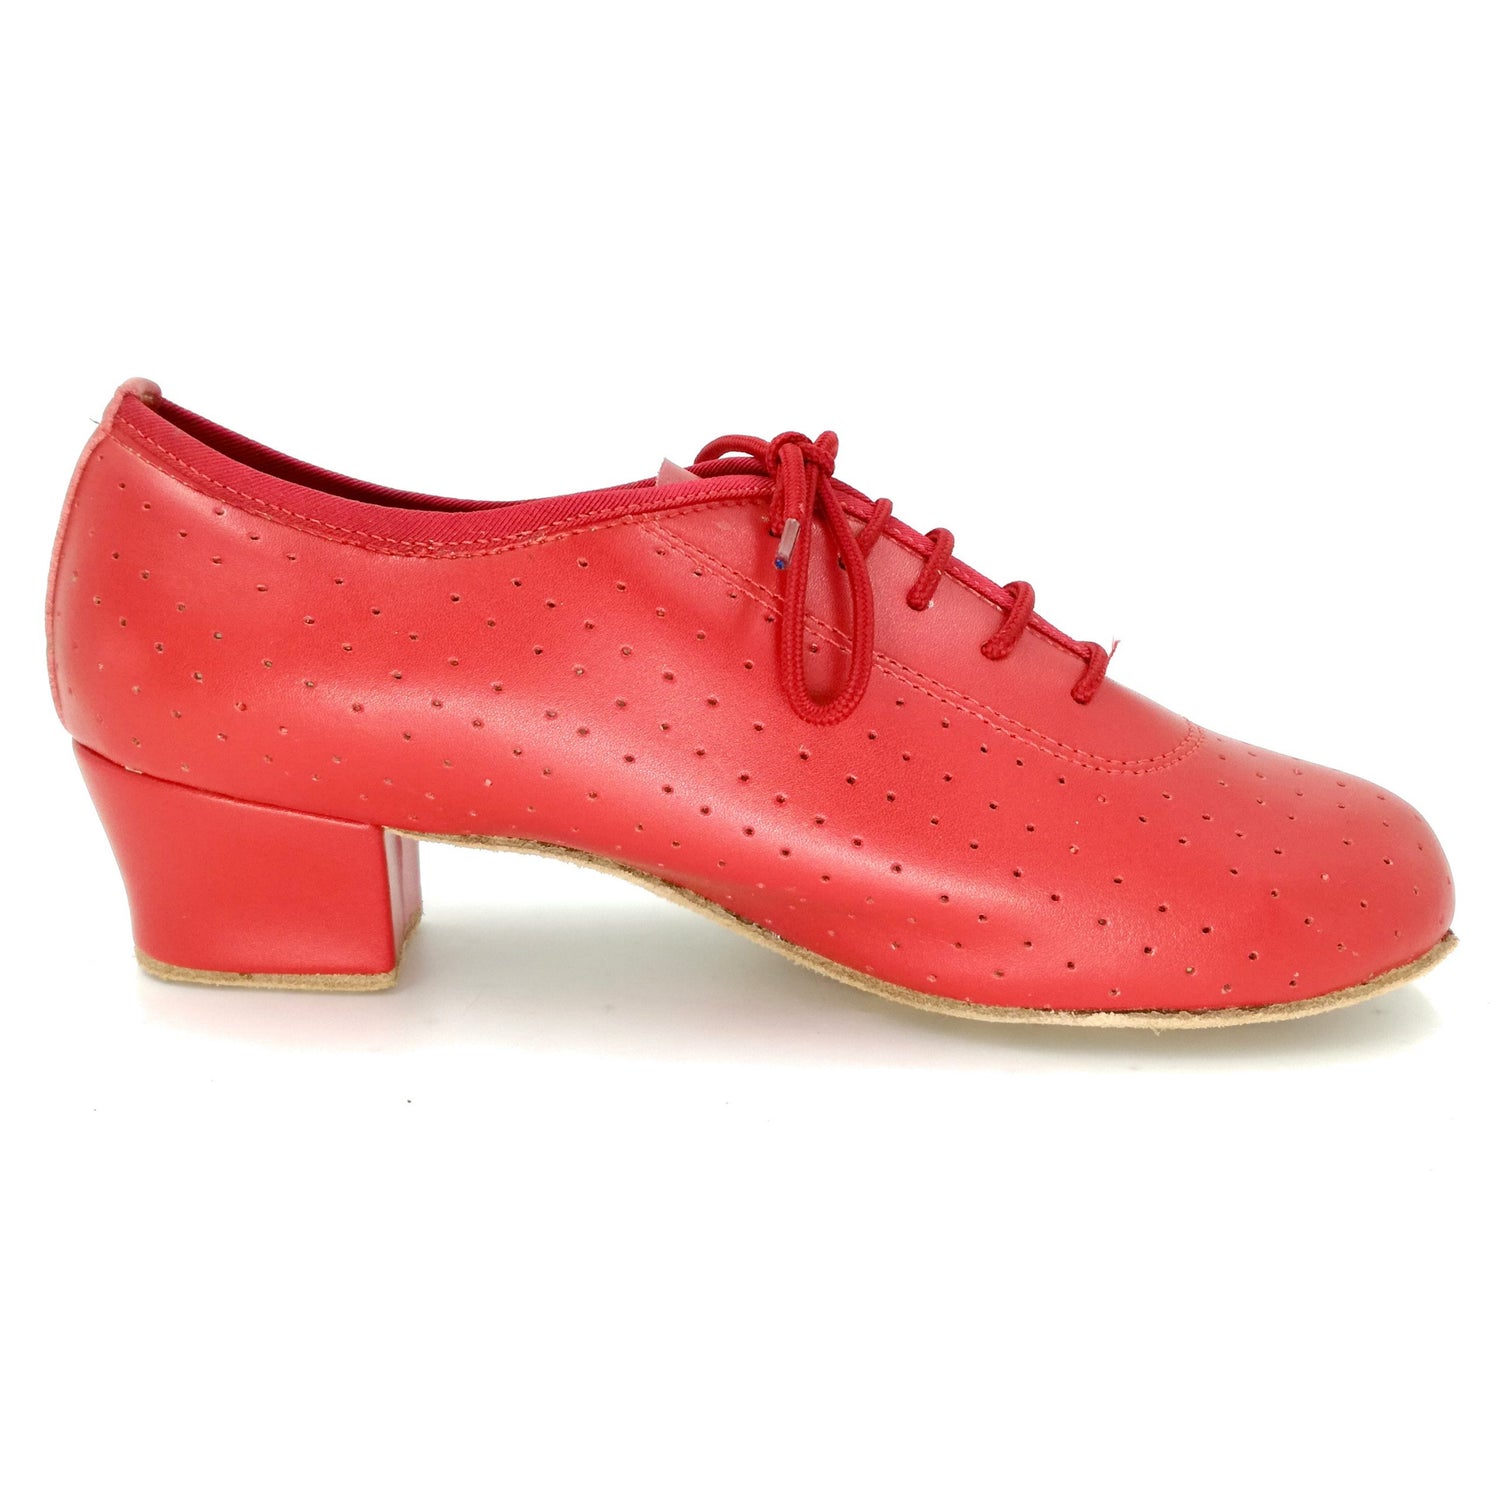 Women red ballroom dancing shoes with suede sole and lace-up closed-toe design for tango and latin practice (PD5002F)4